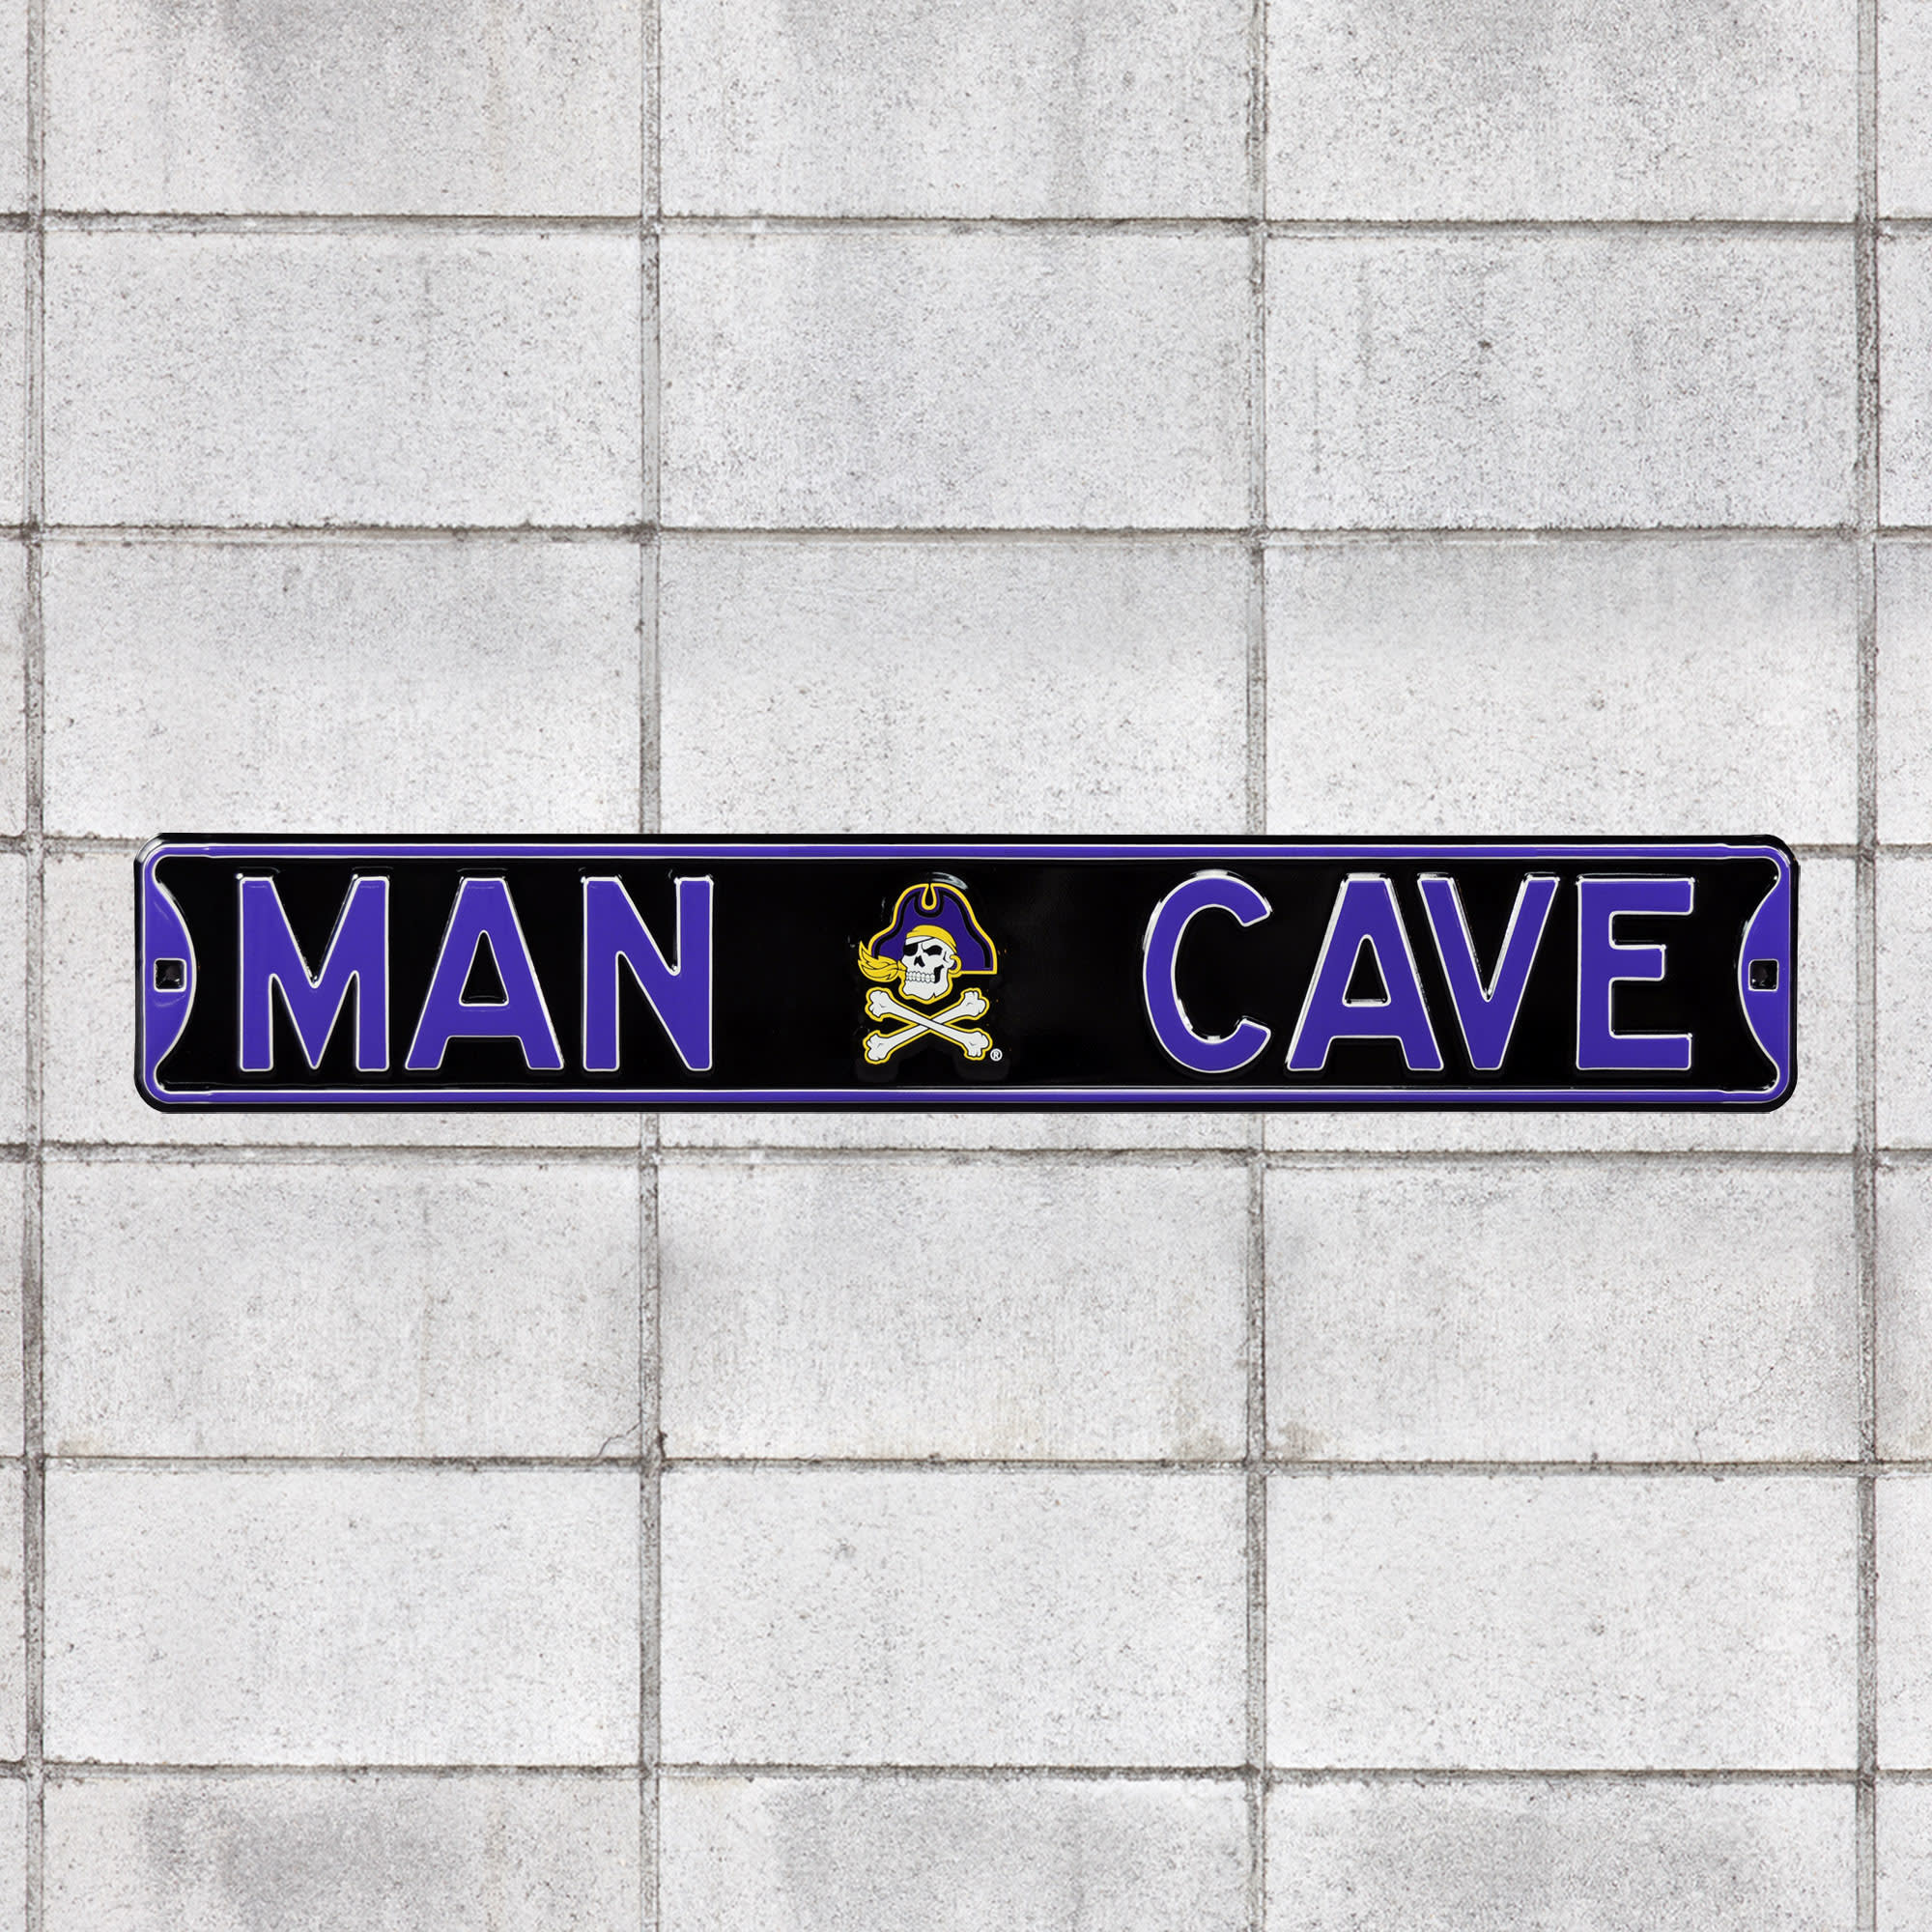 East Carolina Pirates: Man Cave - Officially Licensed Metal Street Sign 36.0"W x 6.0"H by Fathead | 100% Steel